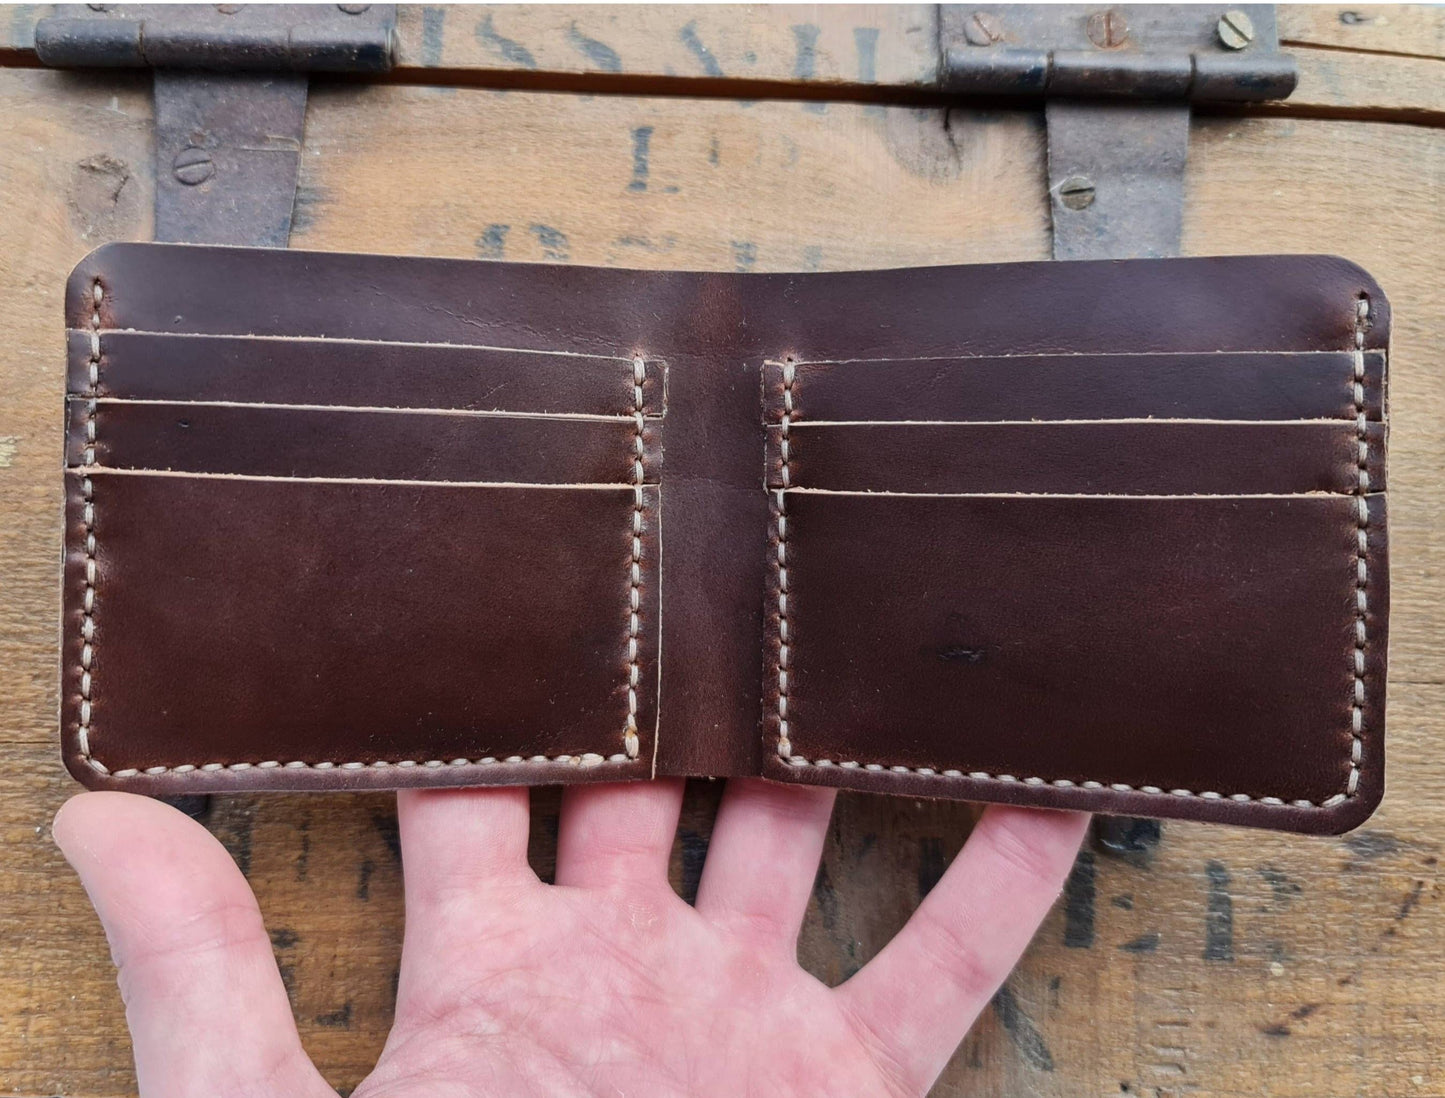 No. 2 Frontiersman Custom Leather Wallets, Horween Brown Chromexcel Leather, Front Open